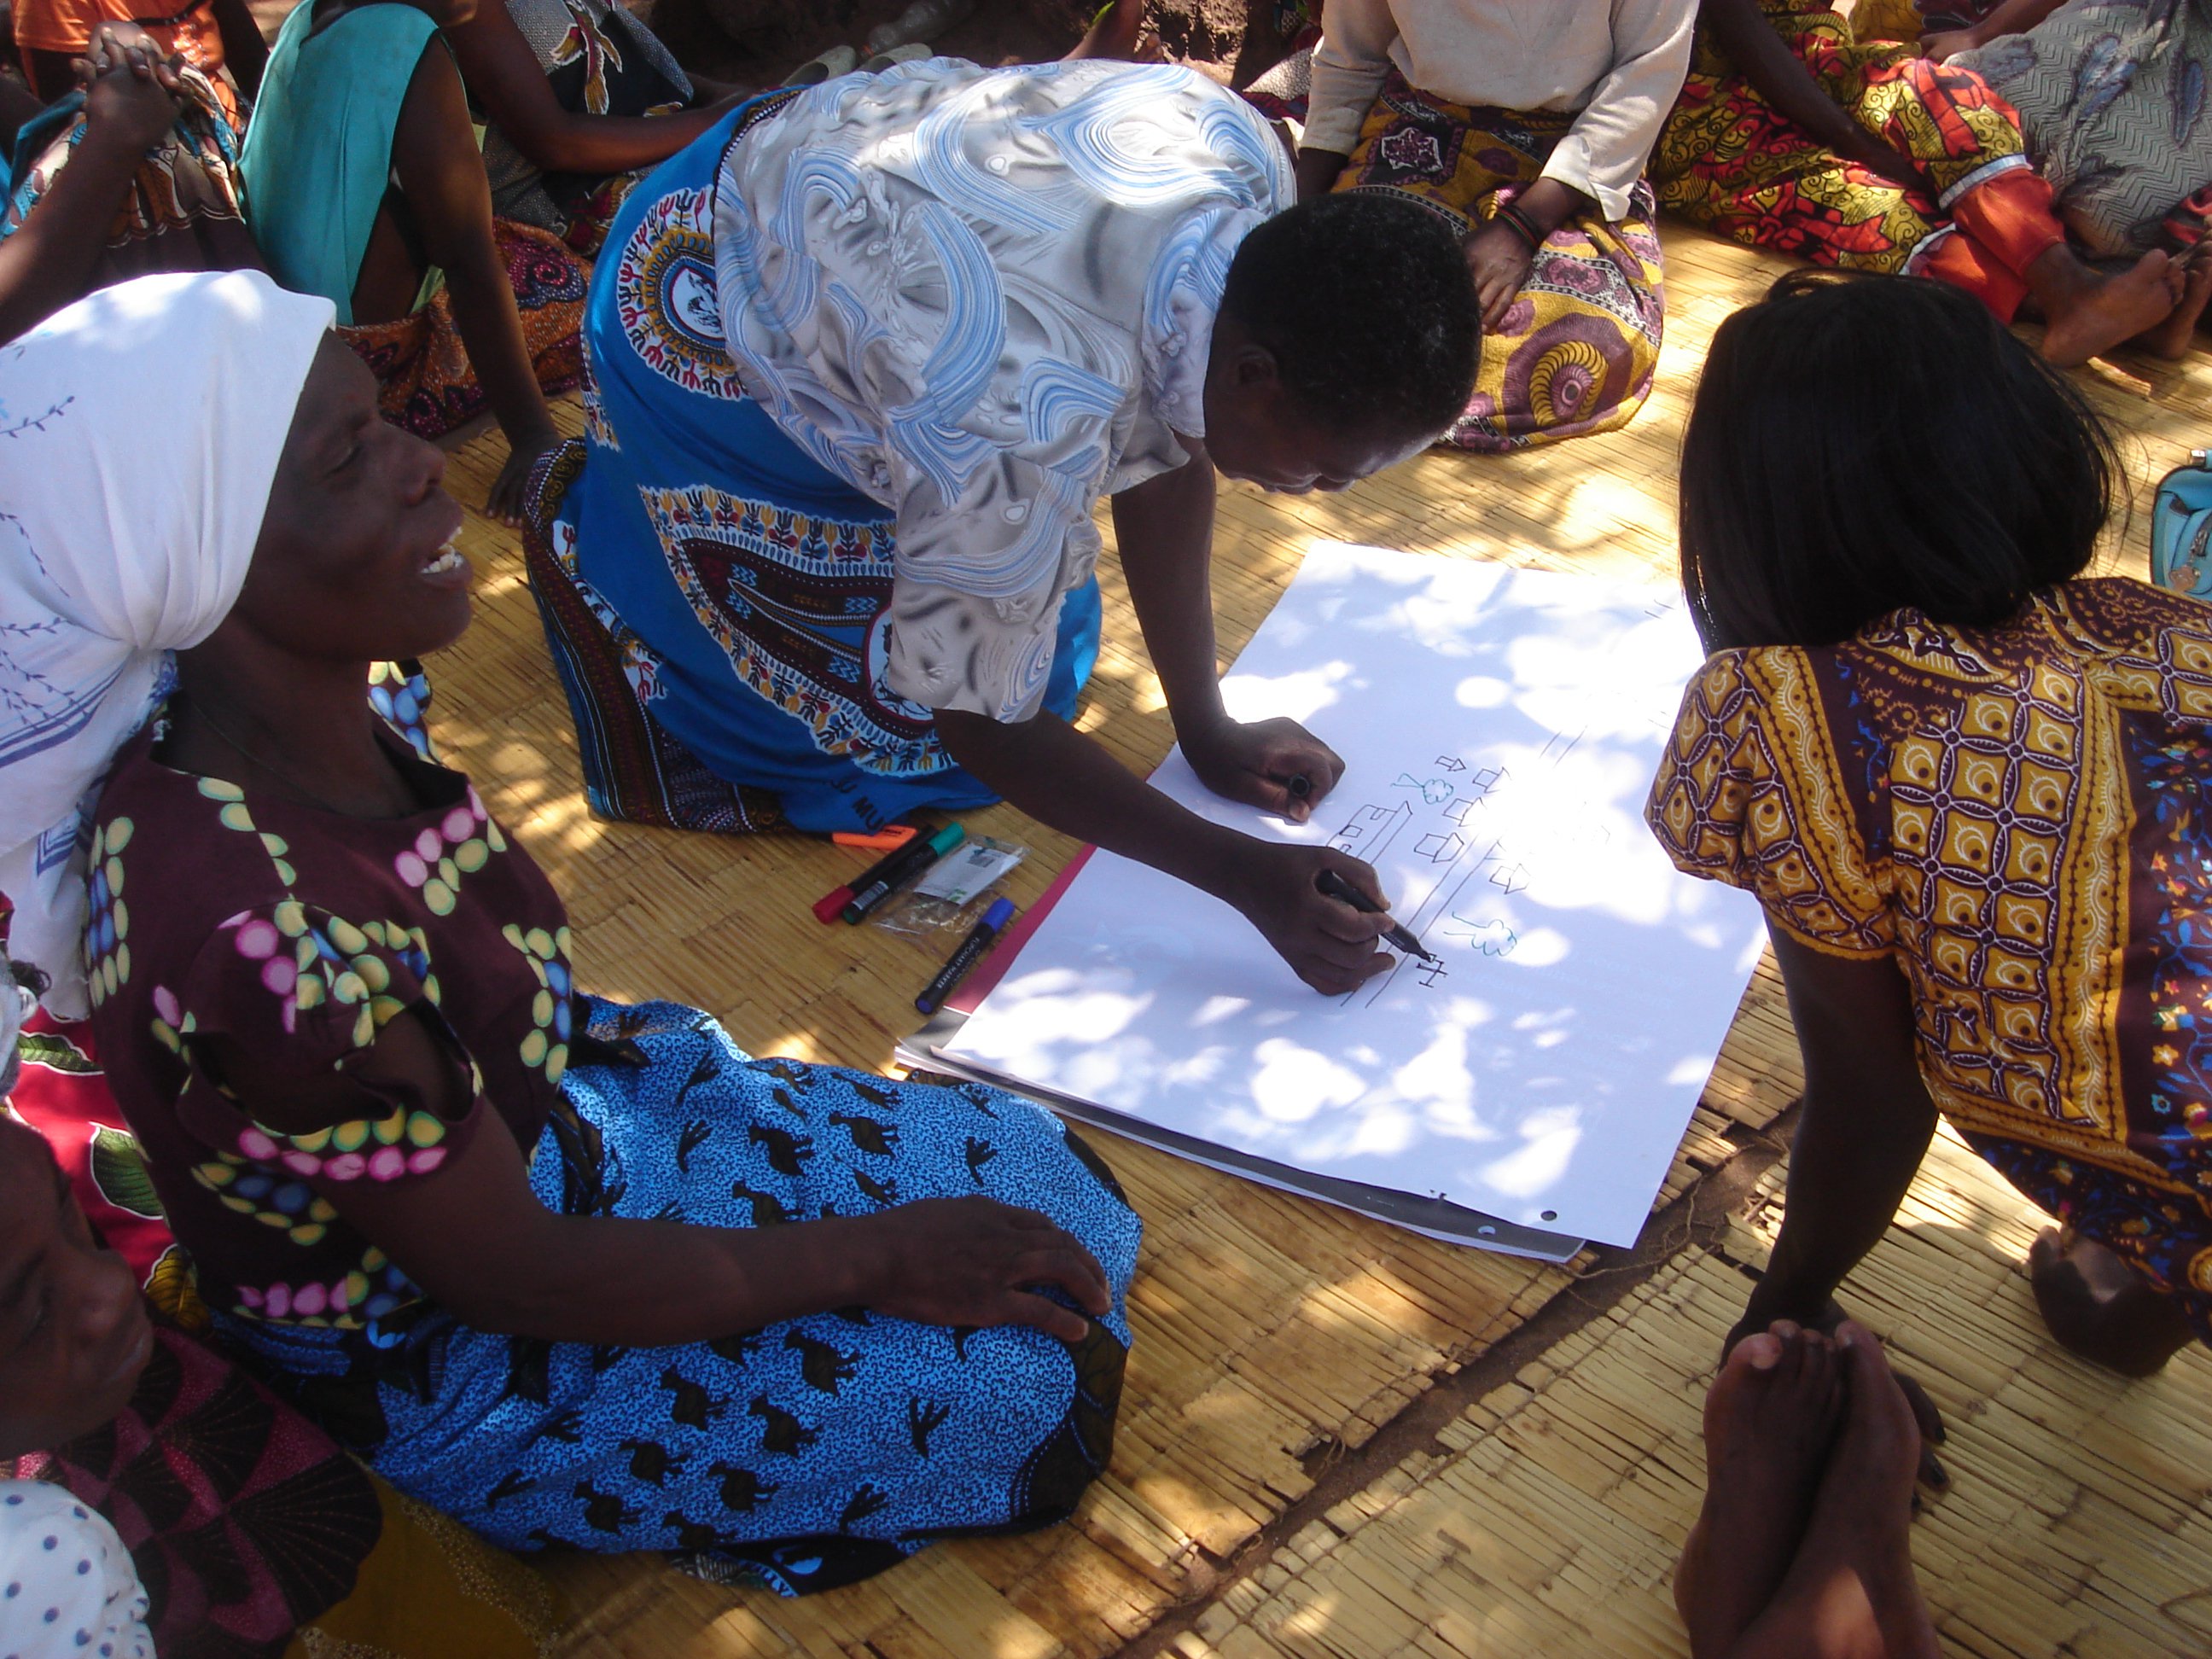 A women's focus group maps their village and surrounding environment, including different water sources. Kambwiri village, Salima district, Malawi. Photo: Naomi Oates/ODI